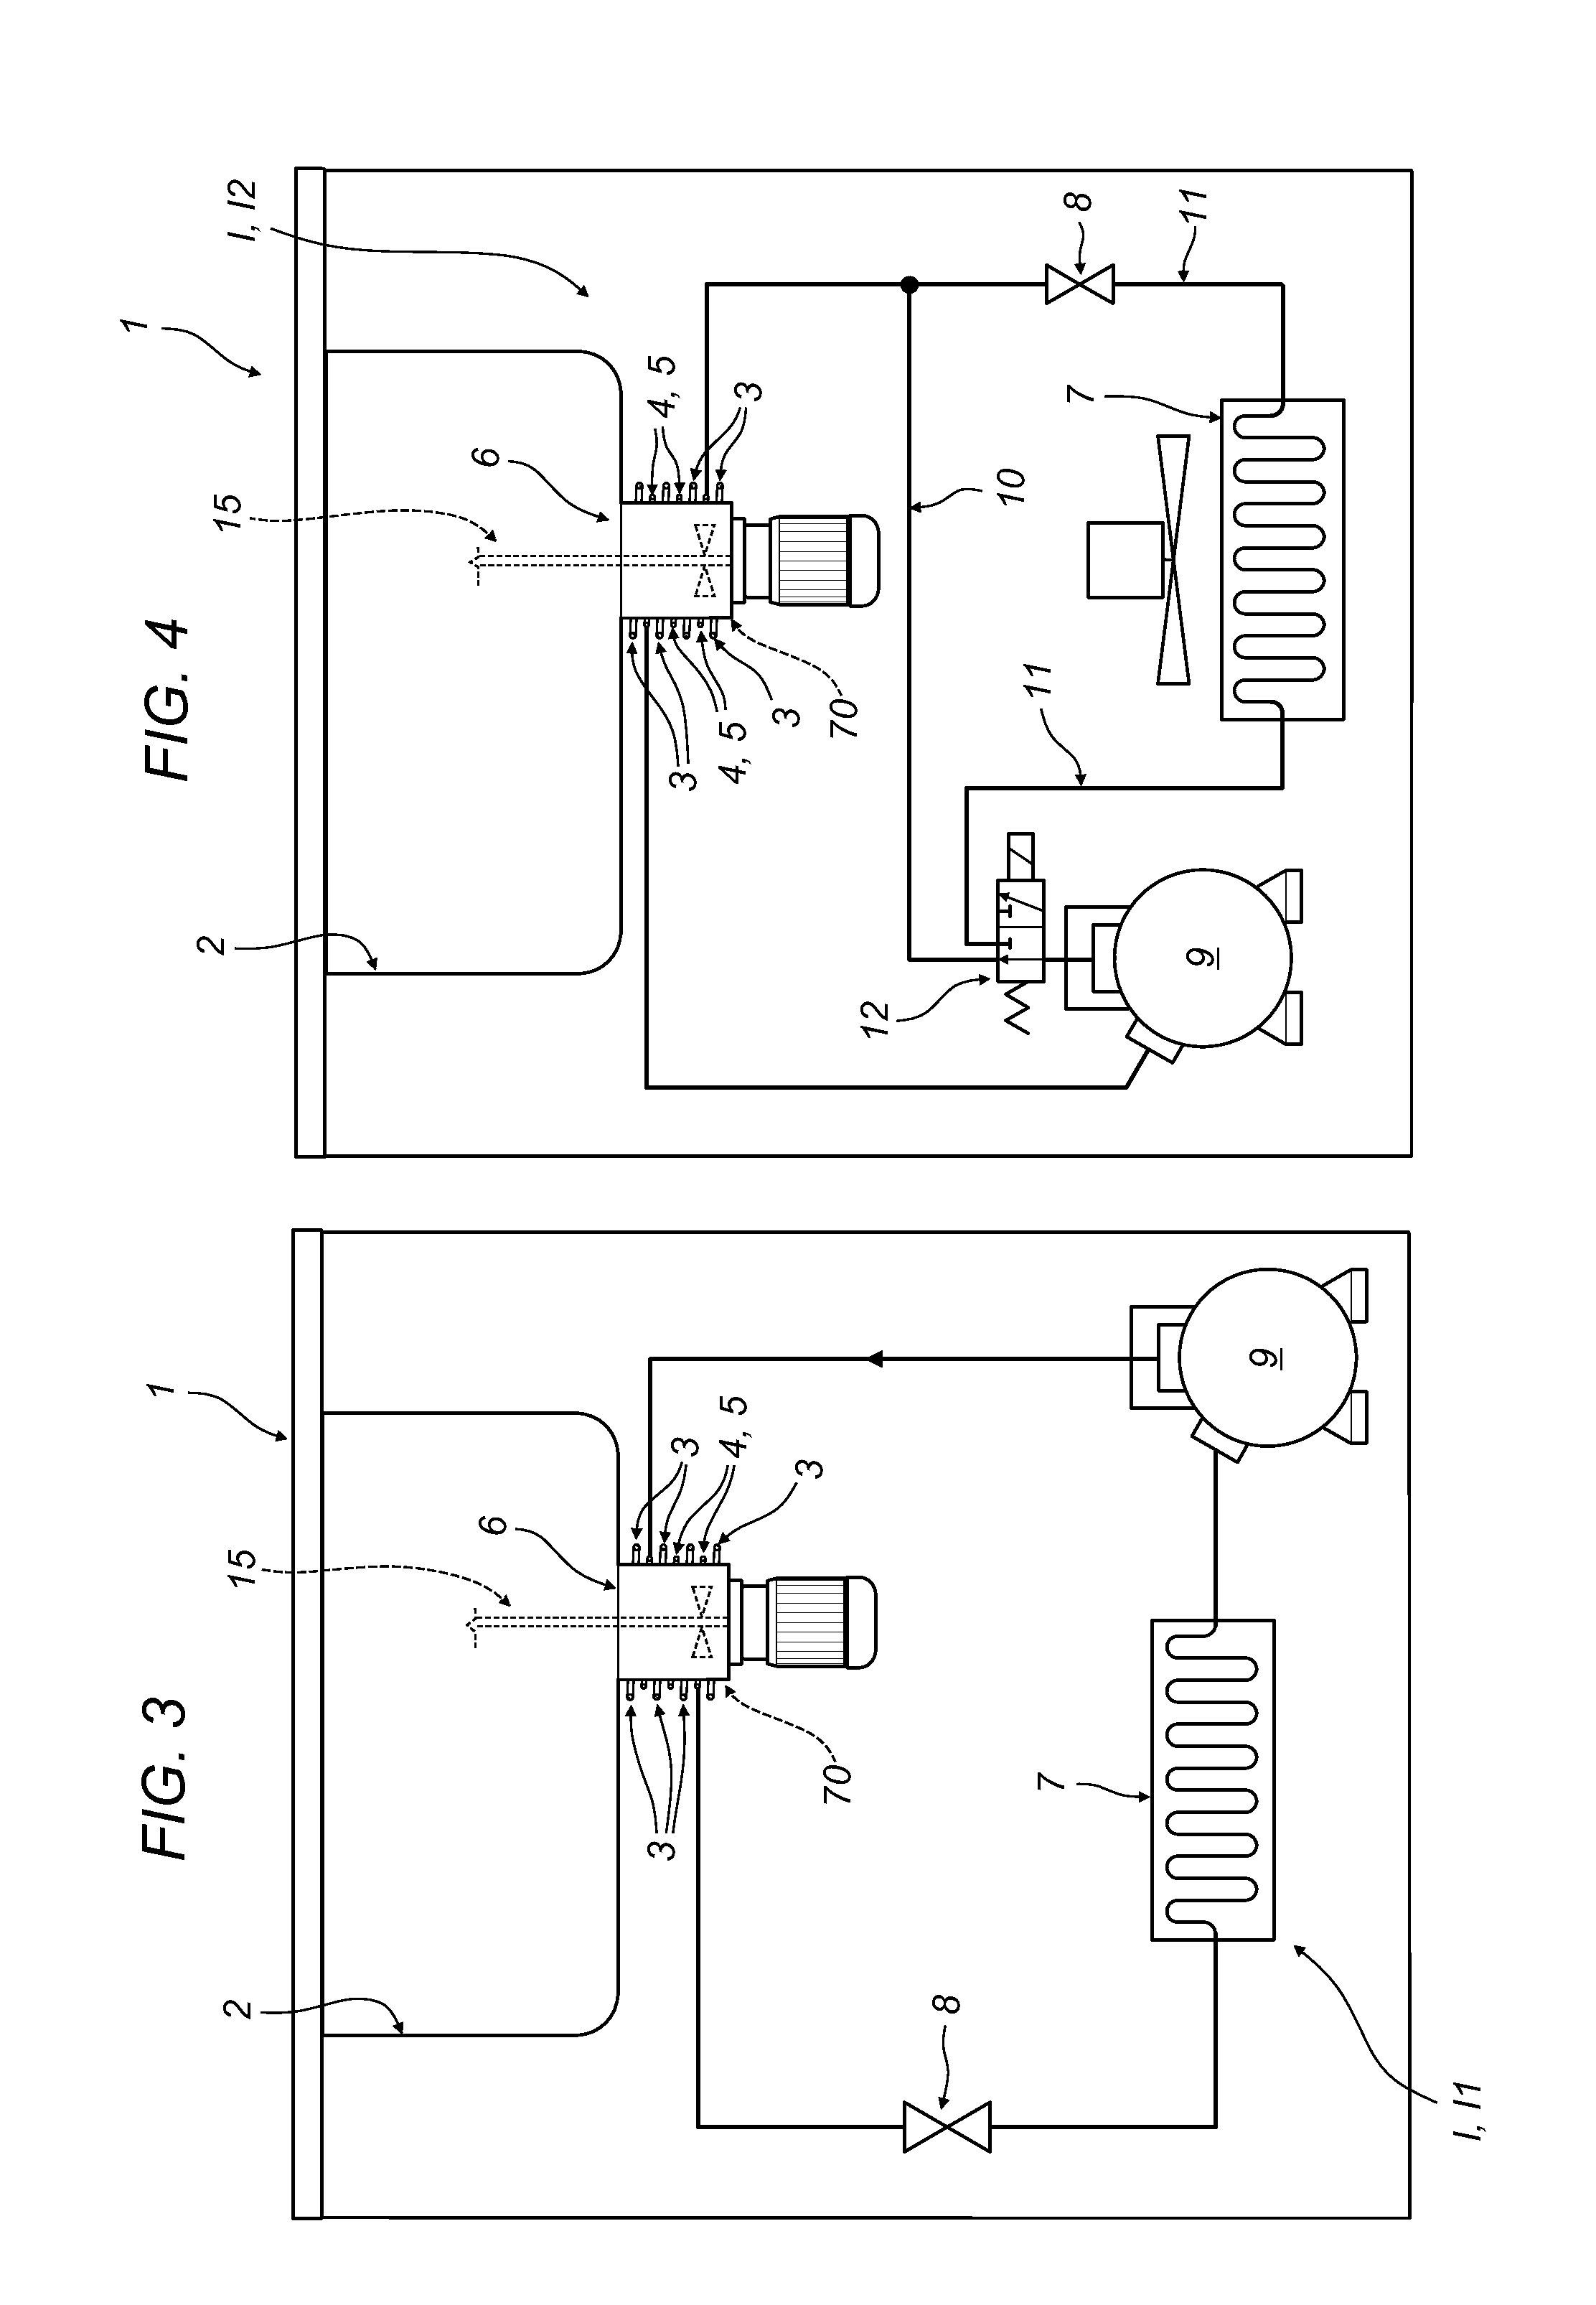 Machine and method for the thermal treatment of liquid and semi-liquid food products